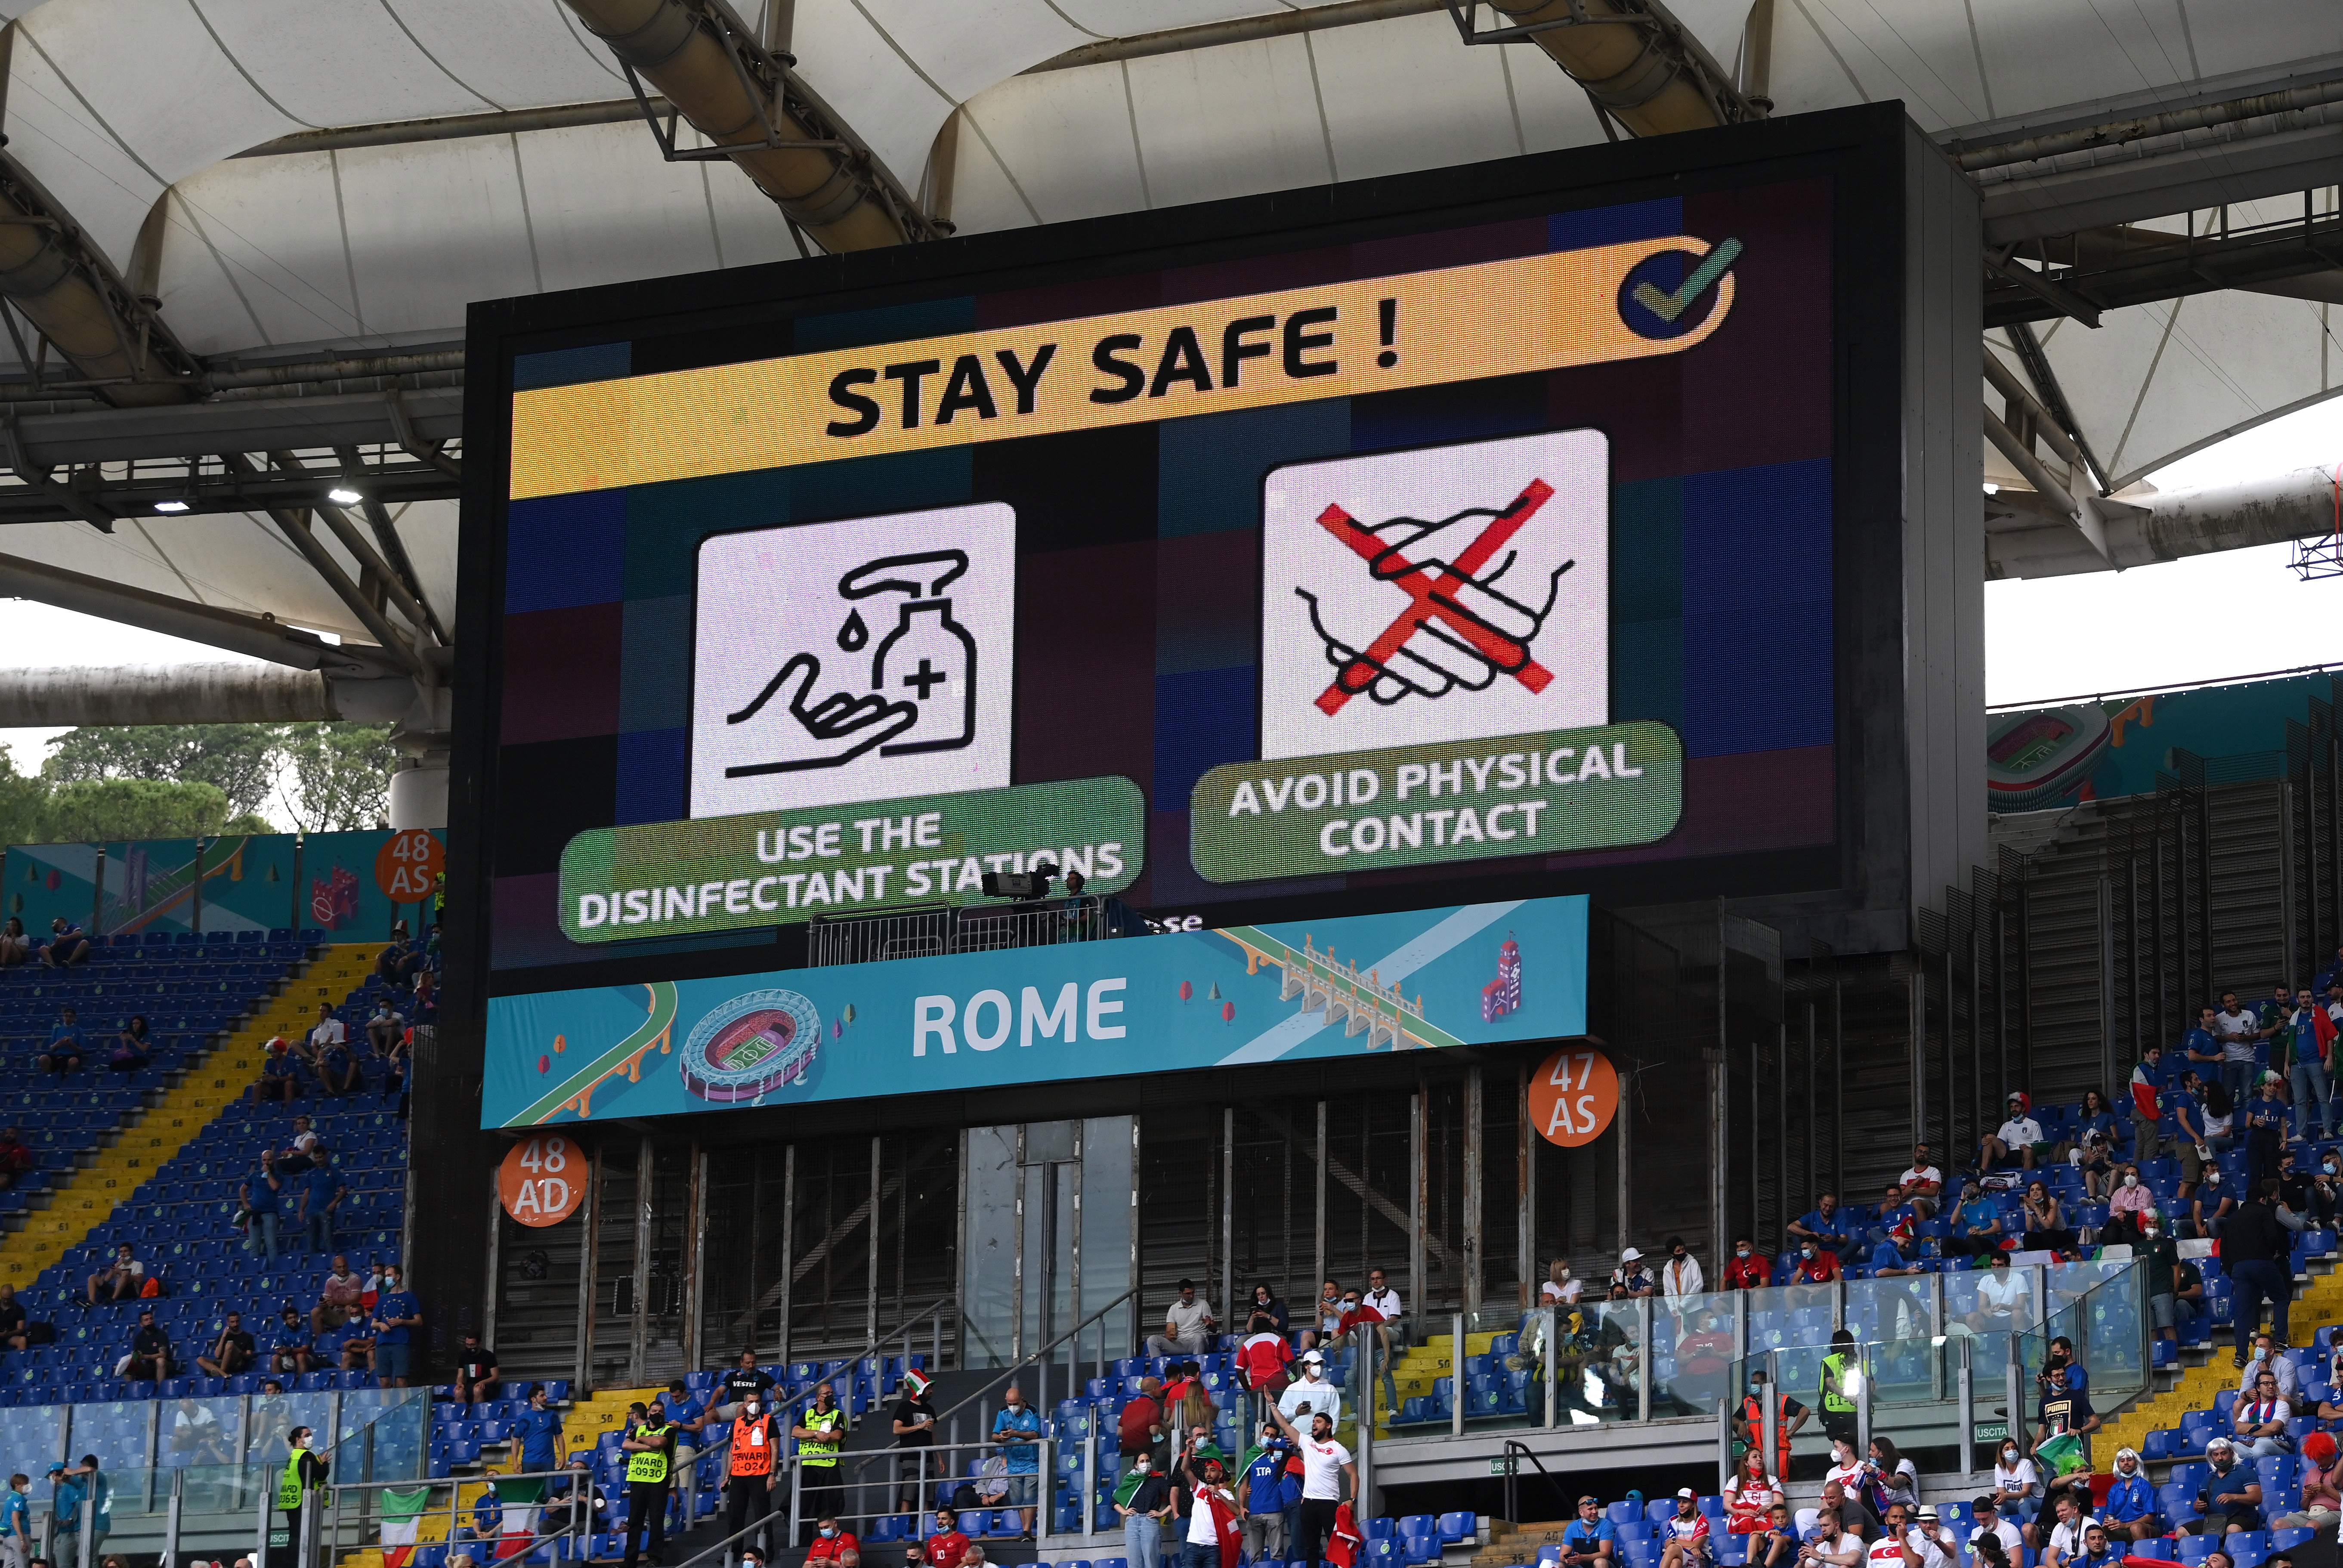 Covid-19 information is displayed on the LED board before the UEFA Euro 2020 Championship Group A match between Turkey and Italy at Stadio Olimpico